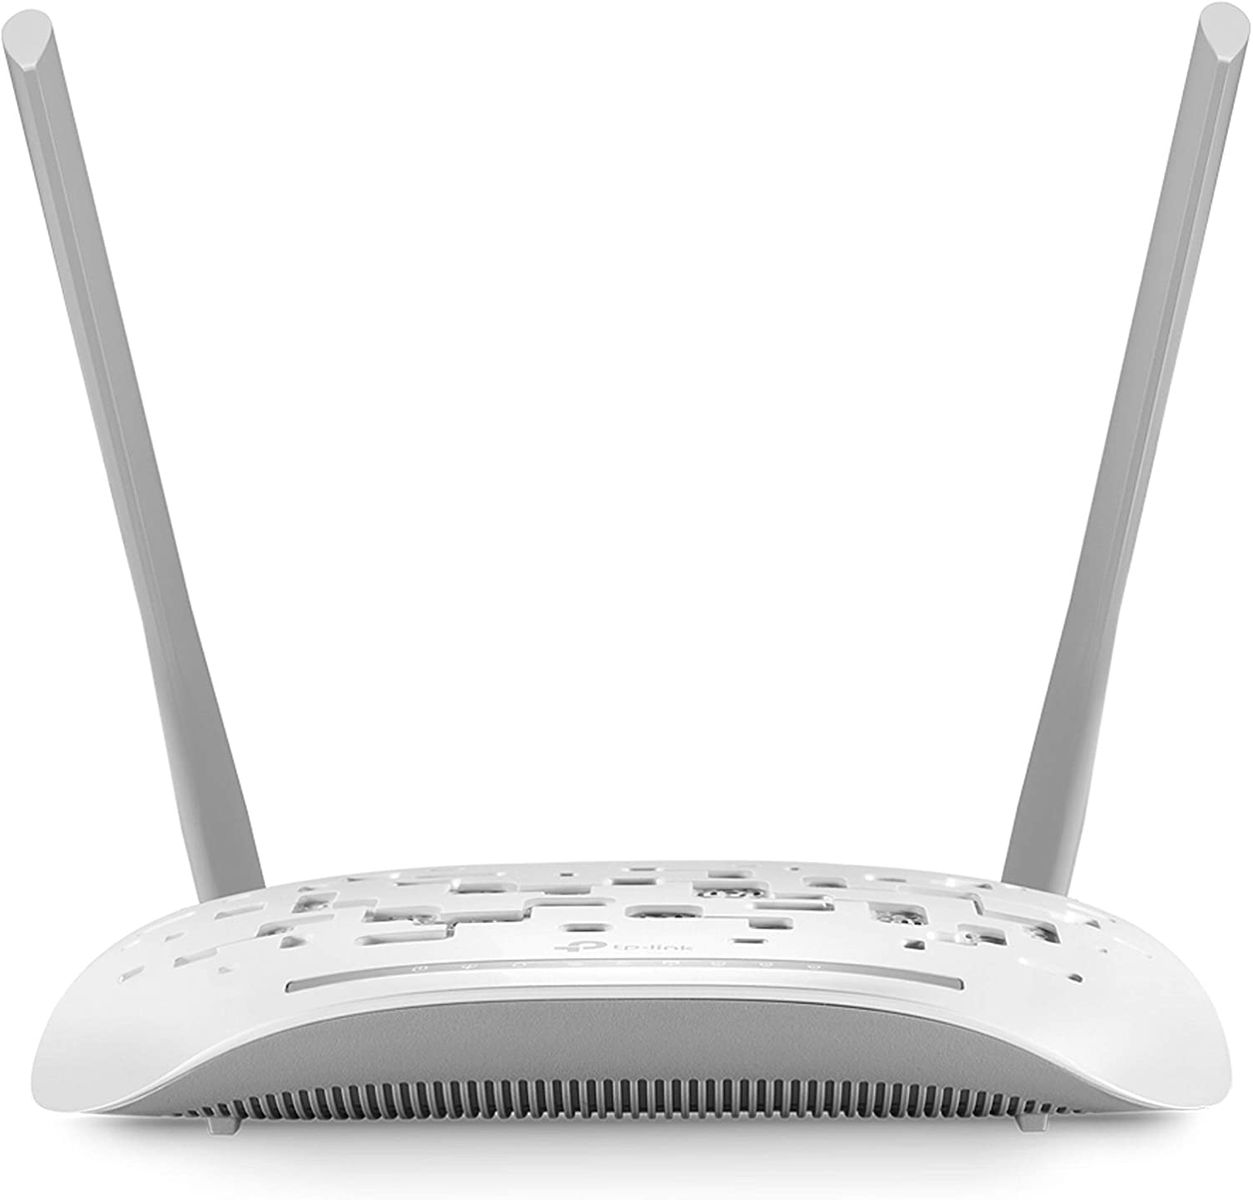 TP-Link TD-W8961N Wireless N Modem Router Access Point ADSL2+ 300 Mbit/s Annex A White v3.0